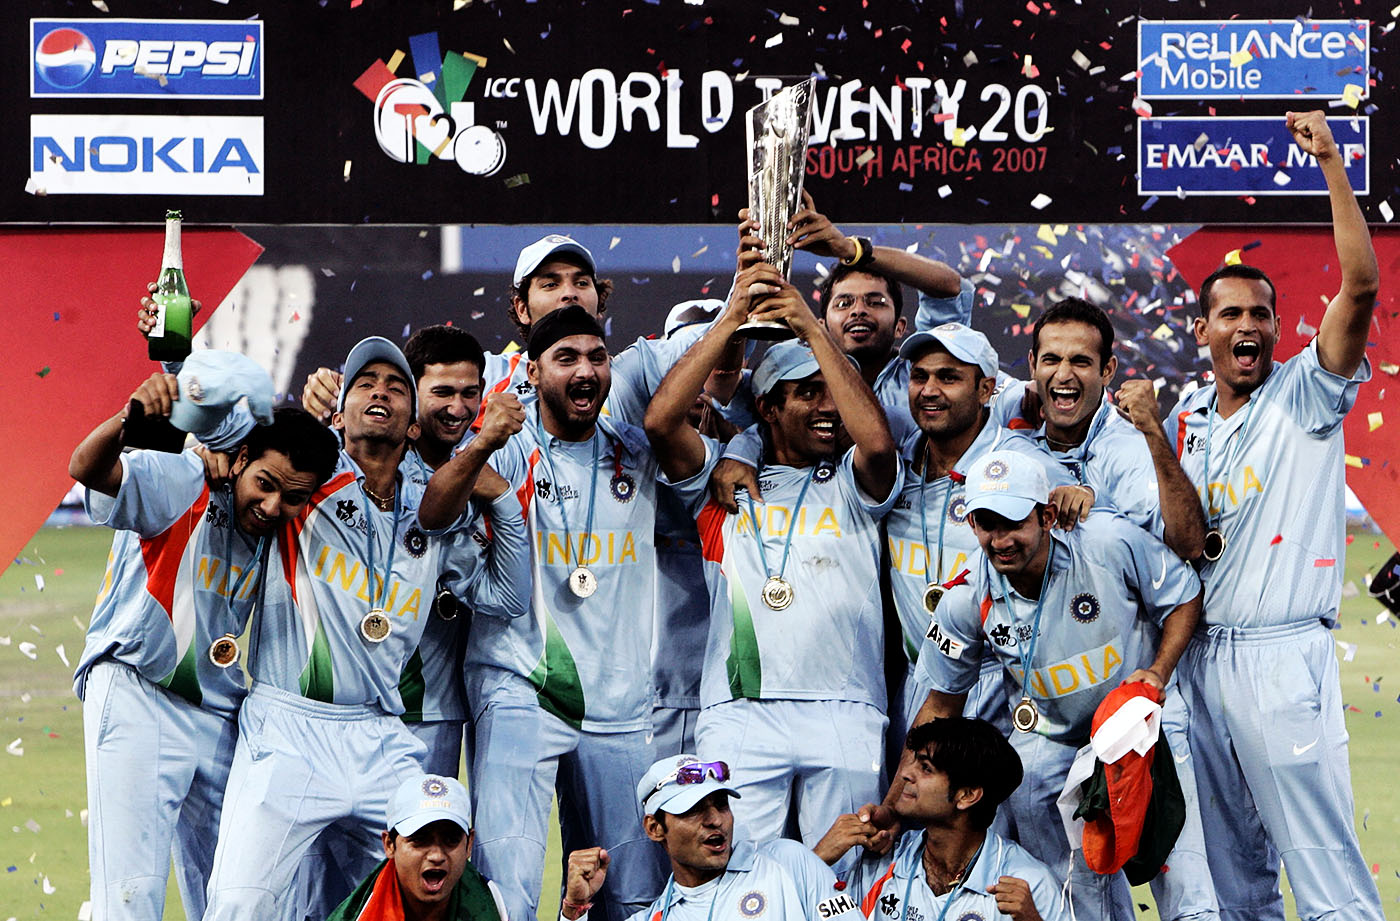 India lift the ICC World Twenty20 trophy at the end of a thrilling final against Pakistan, India v Pakistan, ICC World Twenty20 final, Johannesburg, September 24, 2007